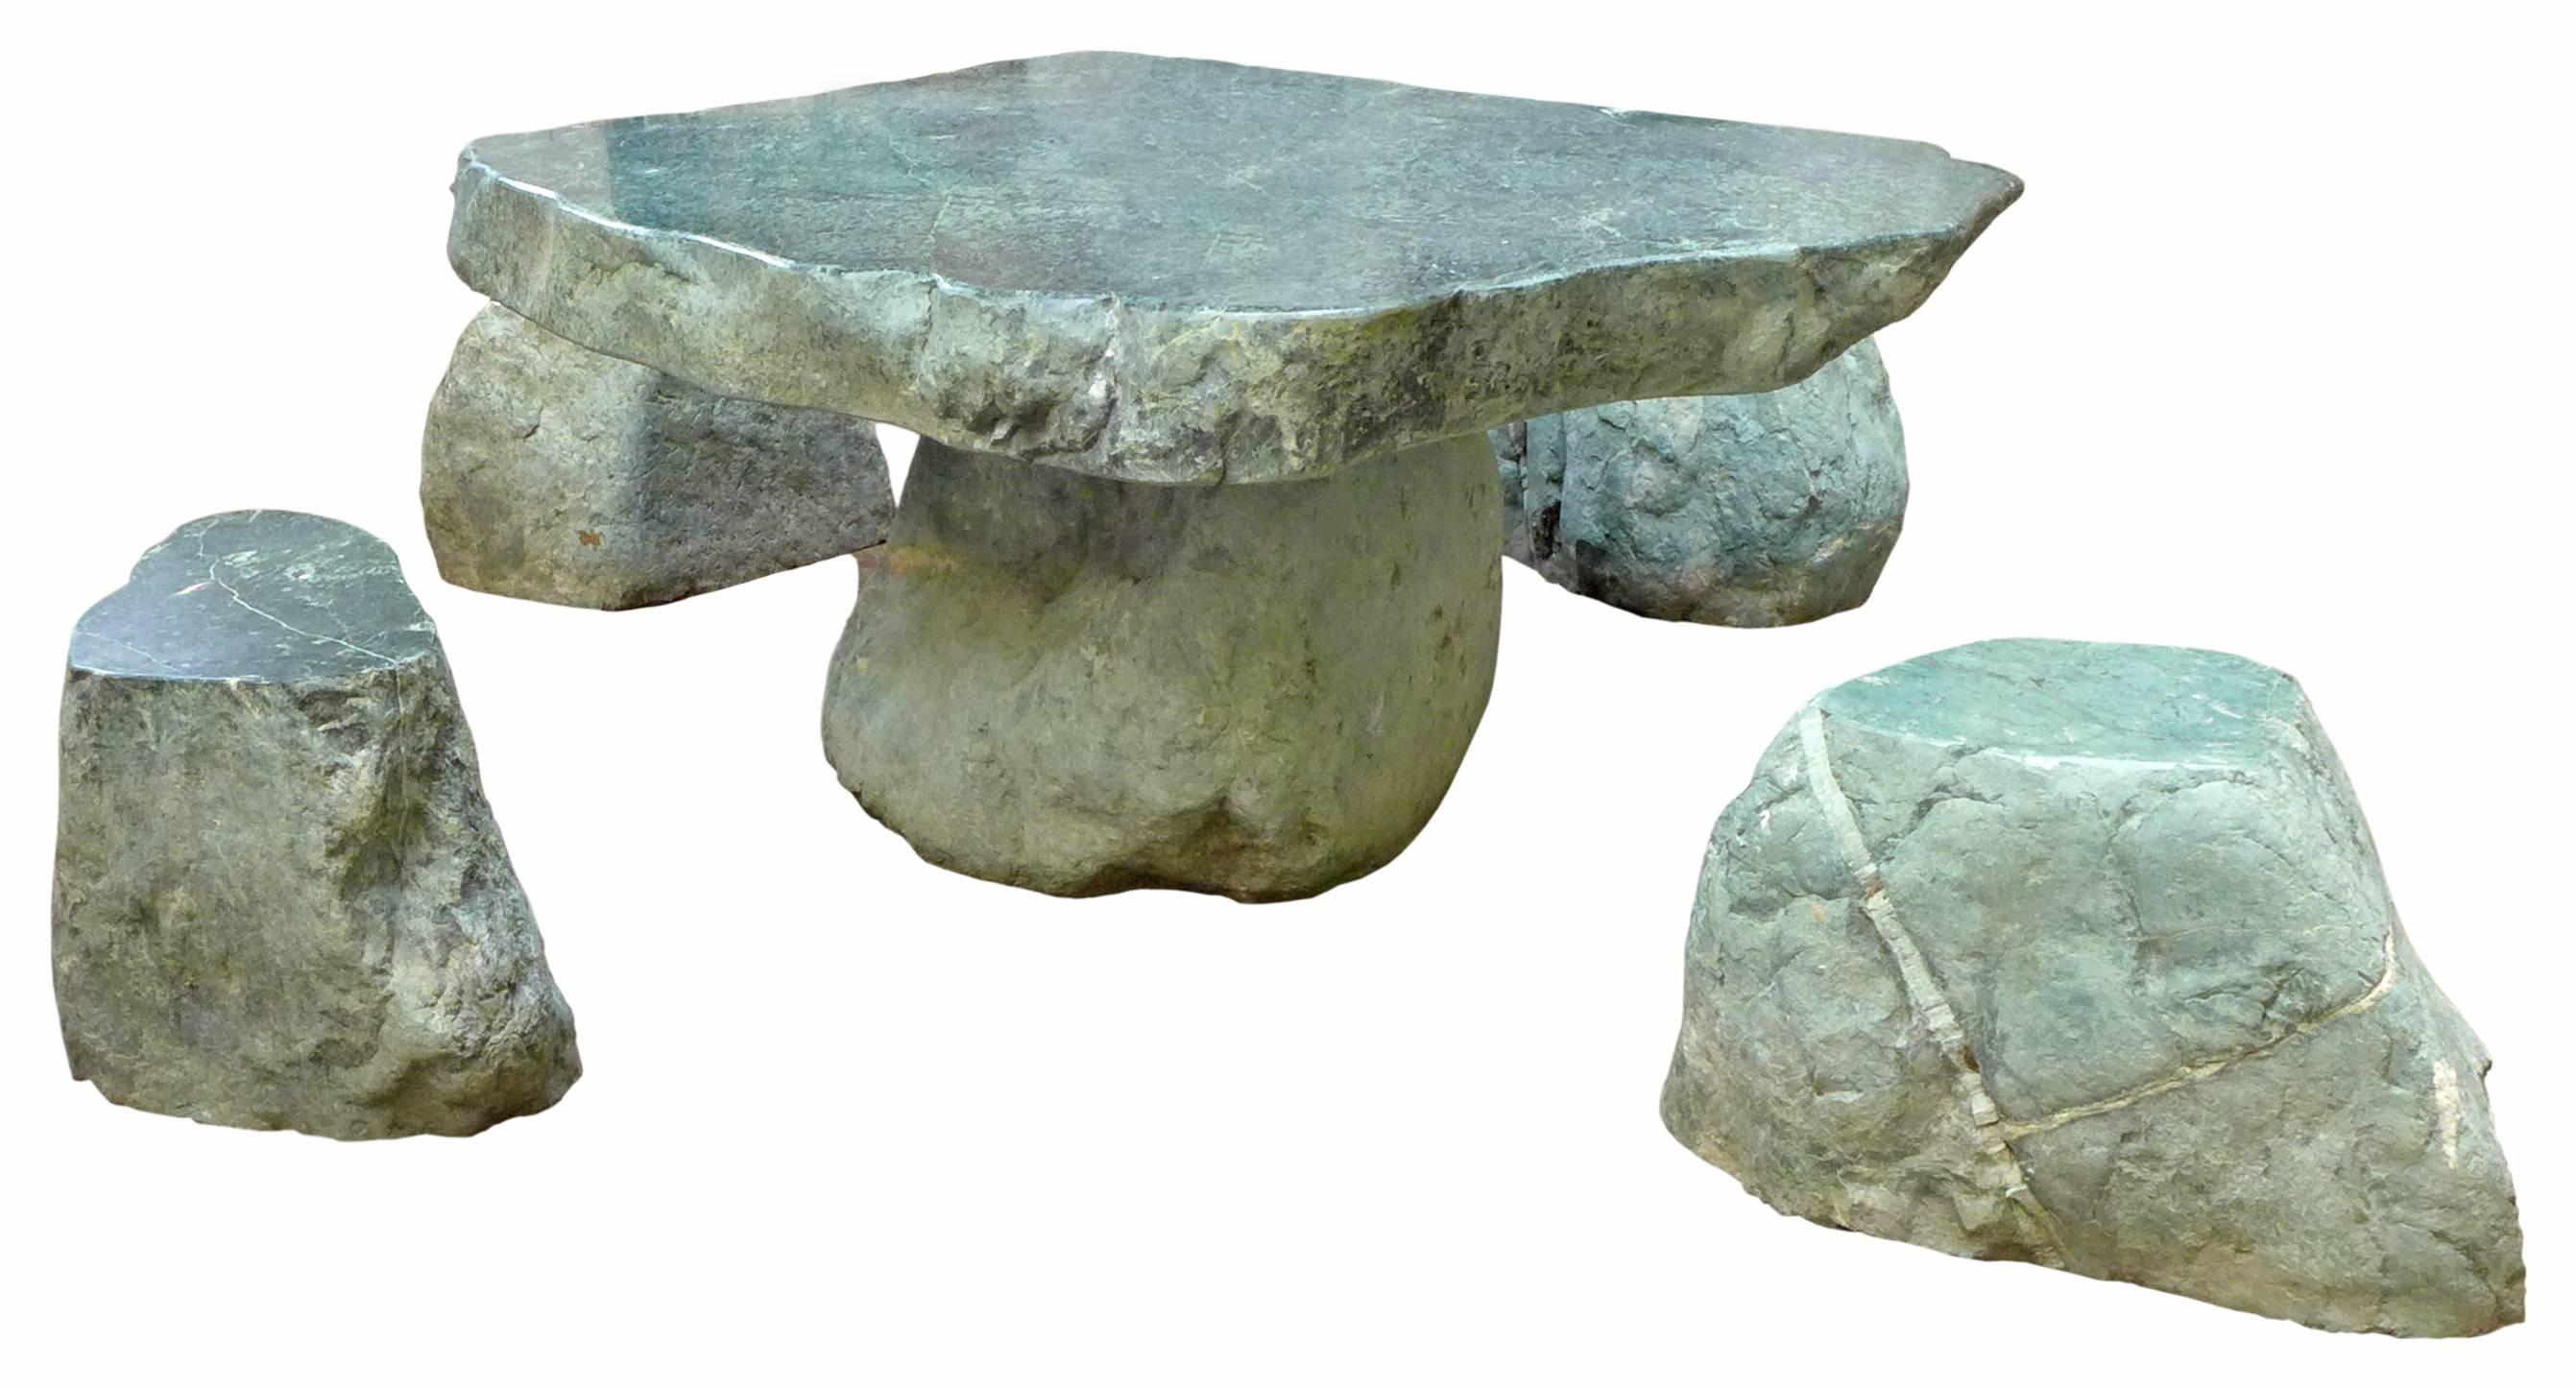 An incredible, low, organic table and stools set in a lush, green granite. A fantastic grouping of wonderfully unexpected scale, form and material; a low, free-edge, thick-slab-top table surrounded by four, variously-sized, free-edge 